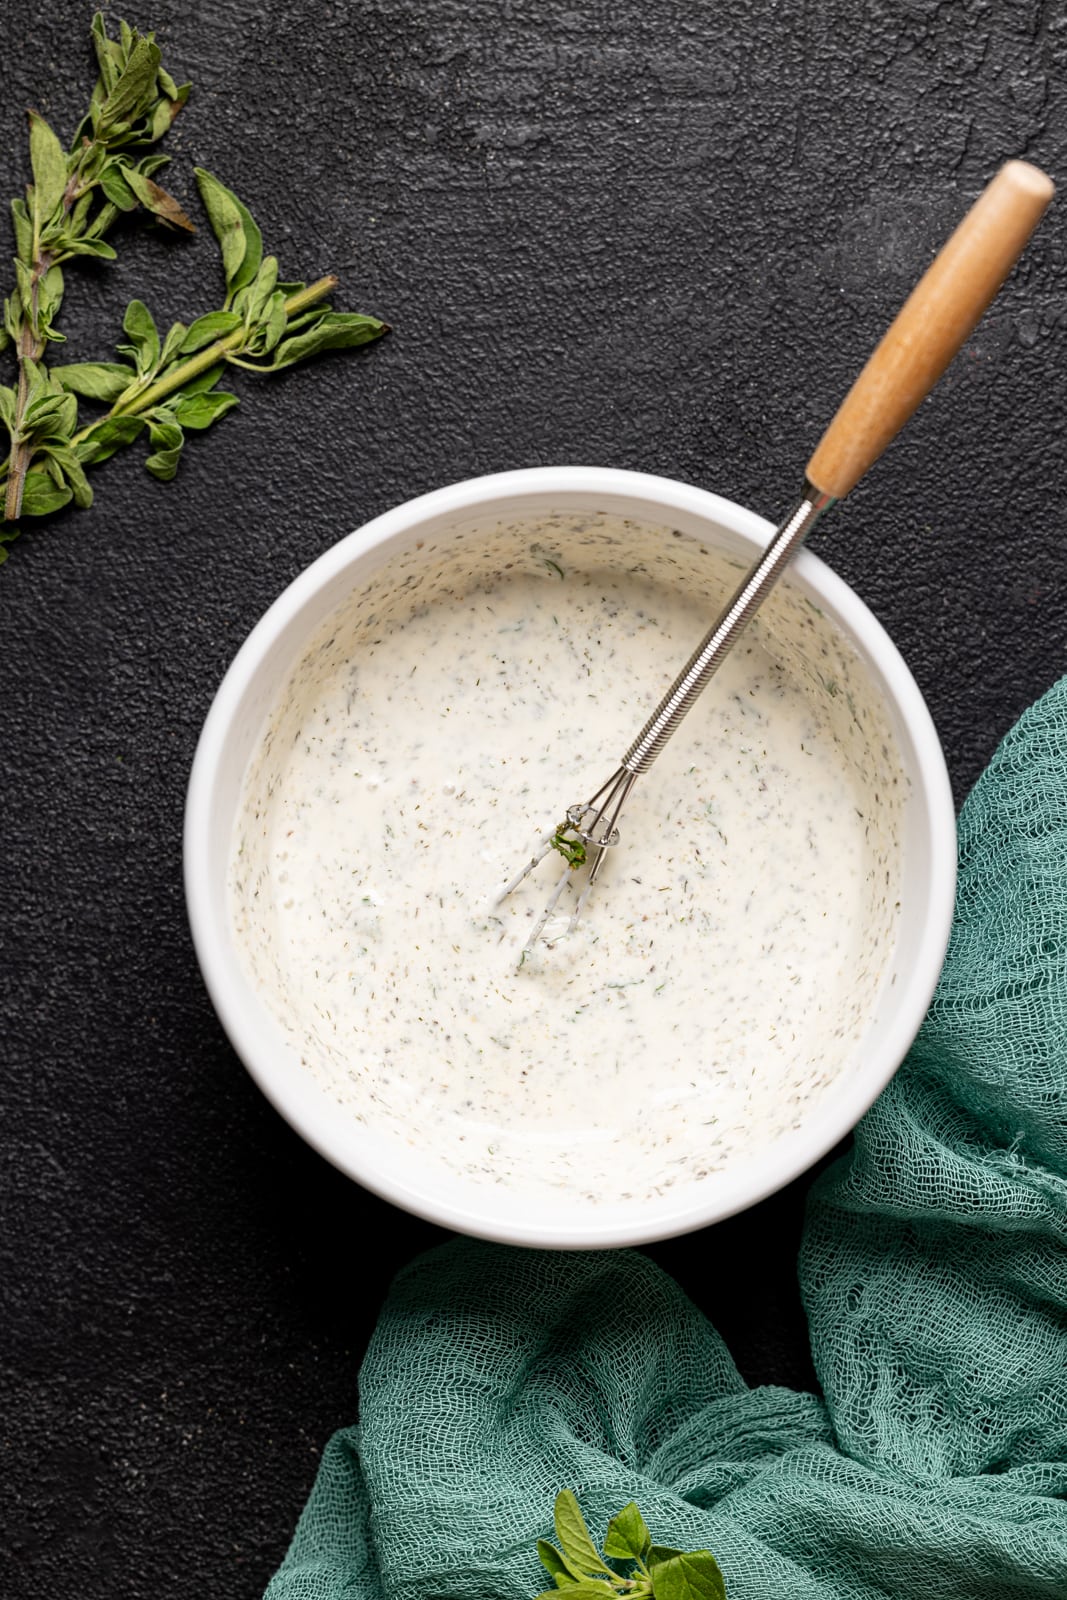 Ranch dressing in a white bowl on a black table with a whisk.